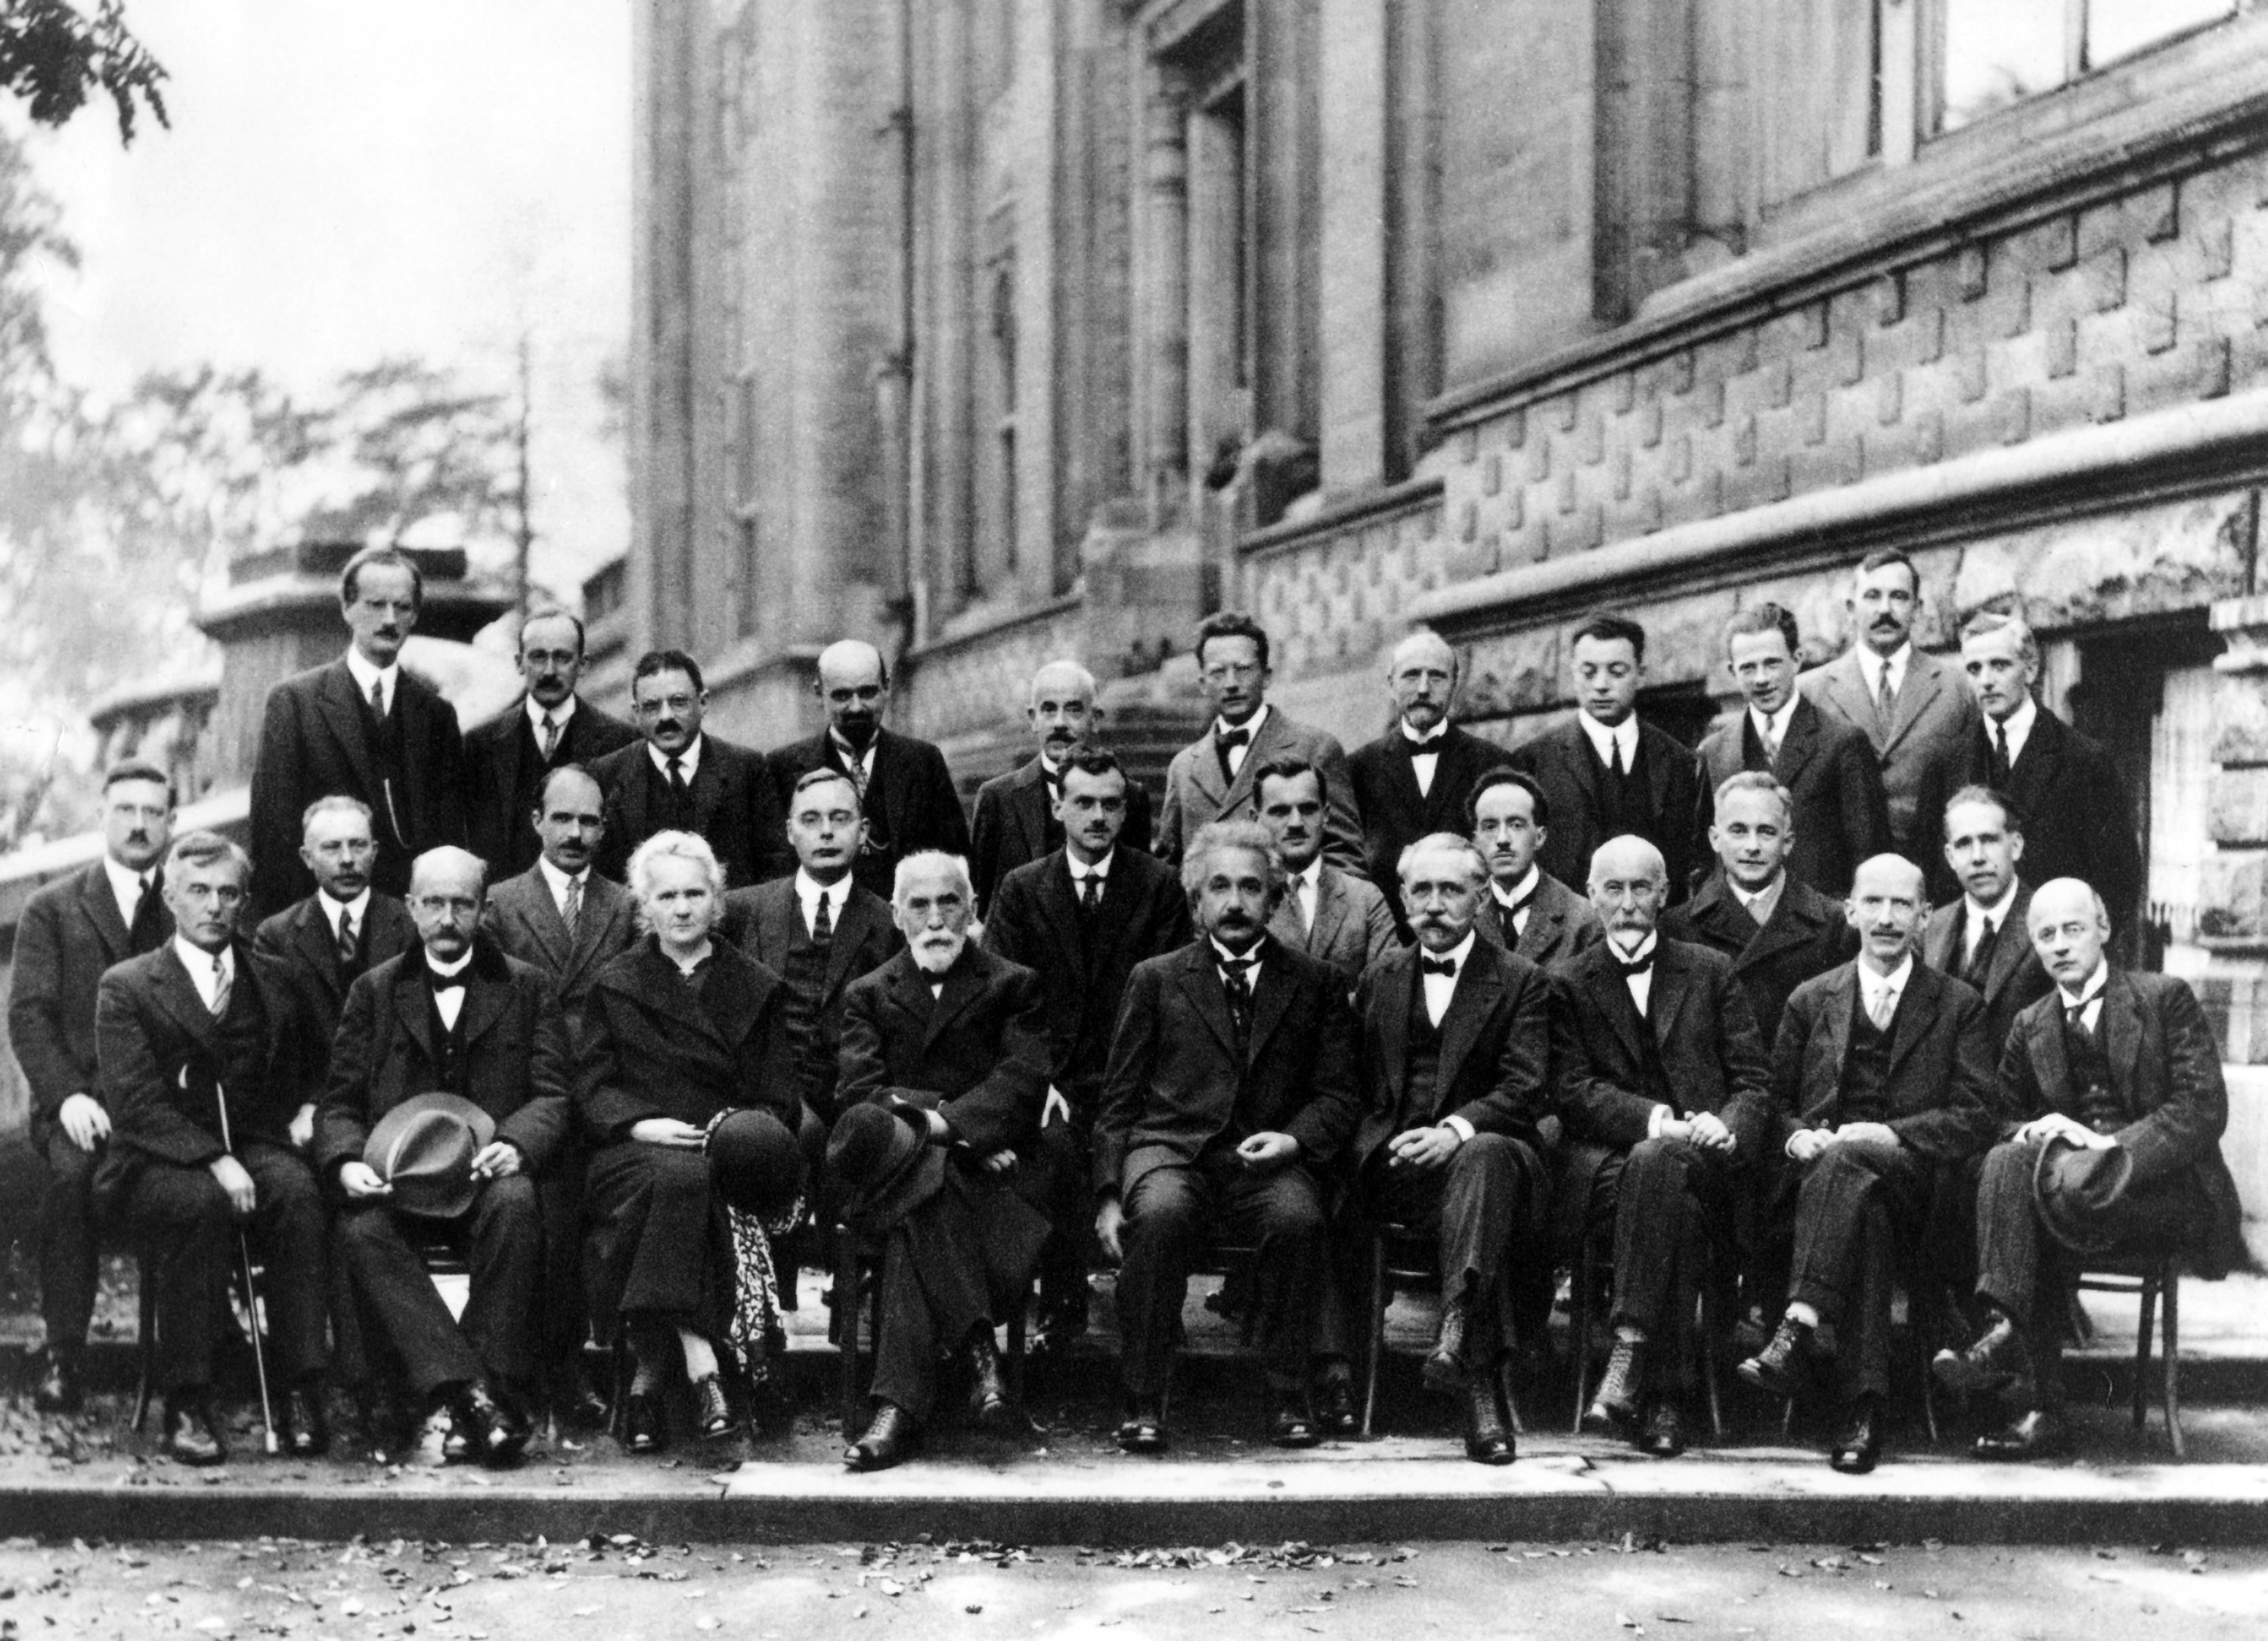 [Translate to English:] 1927 Solvay Conference on Quantum Mechanics. Photograph by Benjamin Couprie, Institut International de Physique Solvay, Brussels, Belgium.